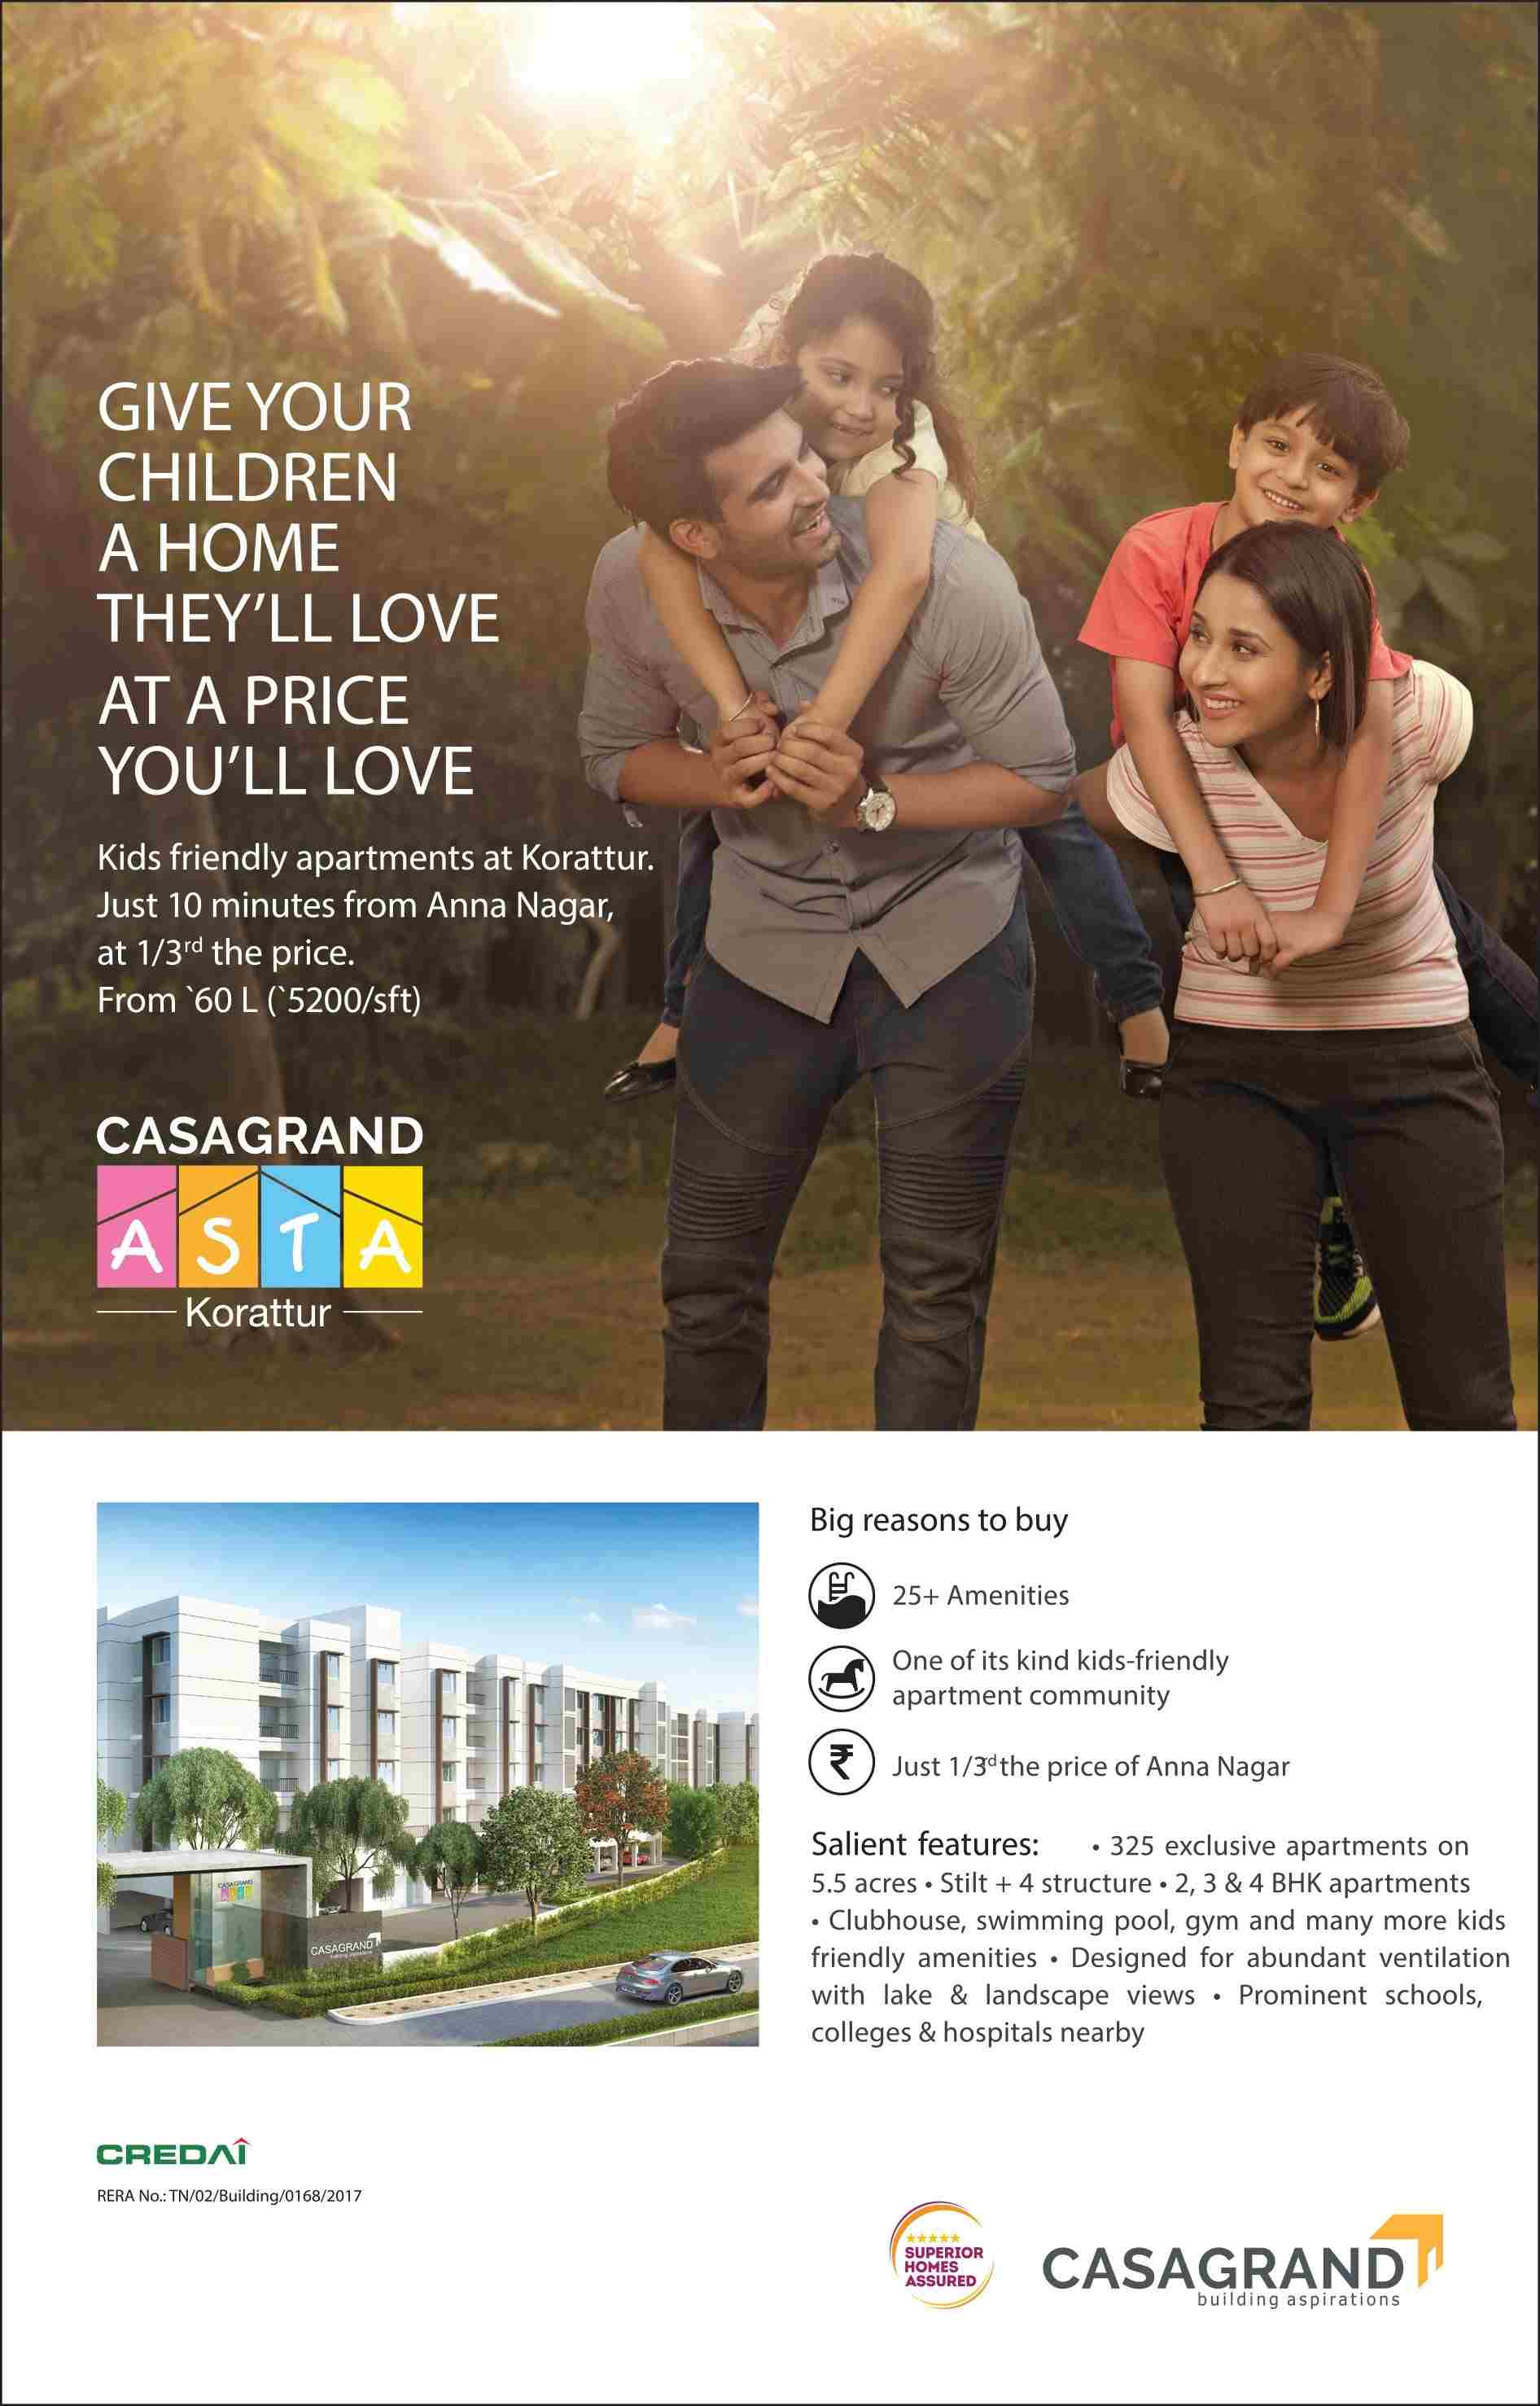 Casagrand Asta - First Kids Friendly Apartments @ Rs. 60 Lacs in Chennai Update